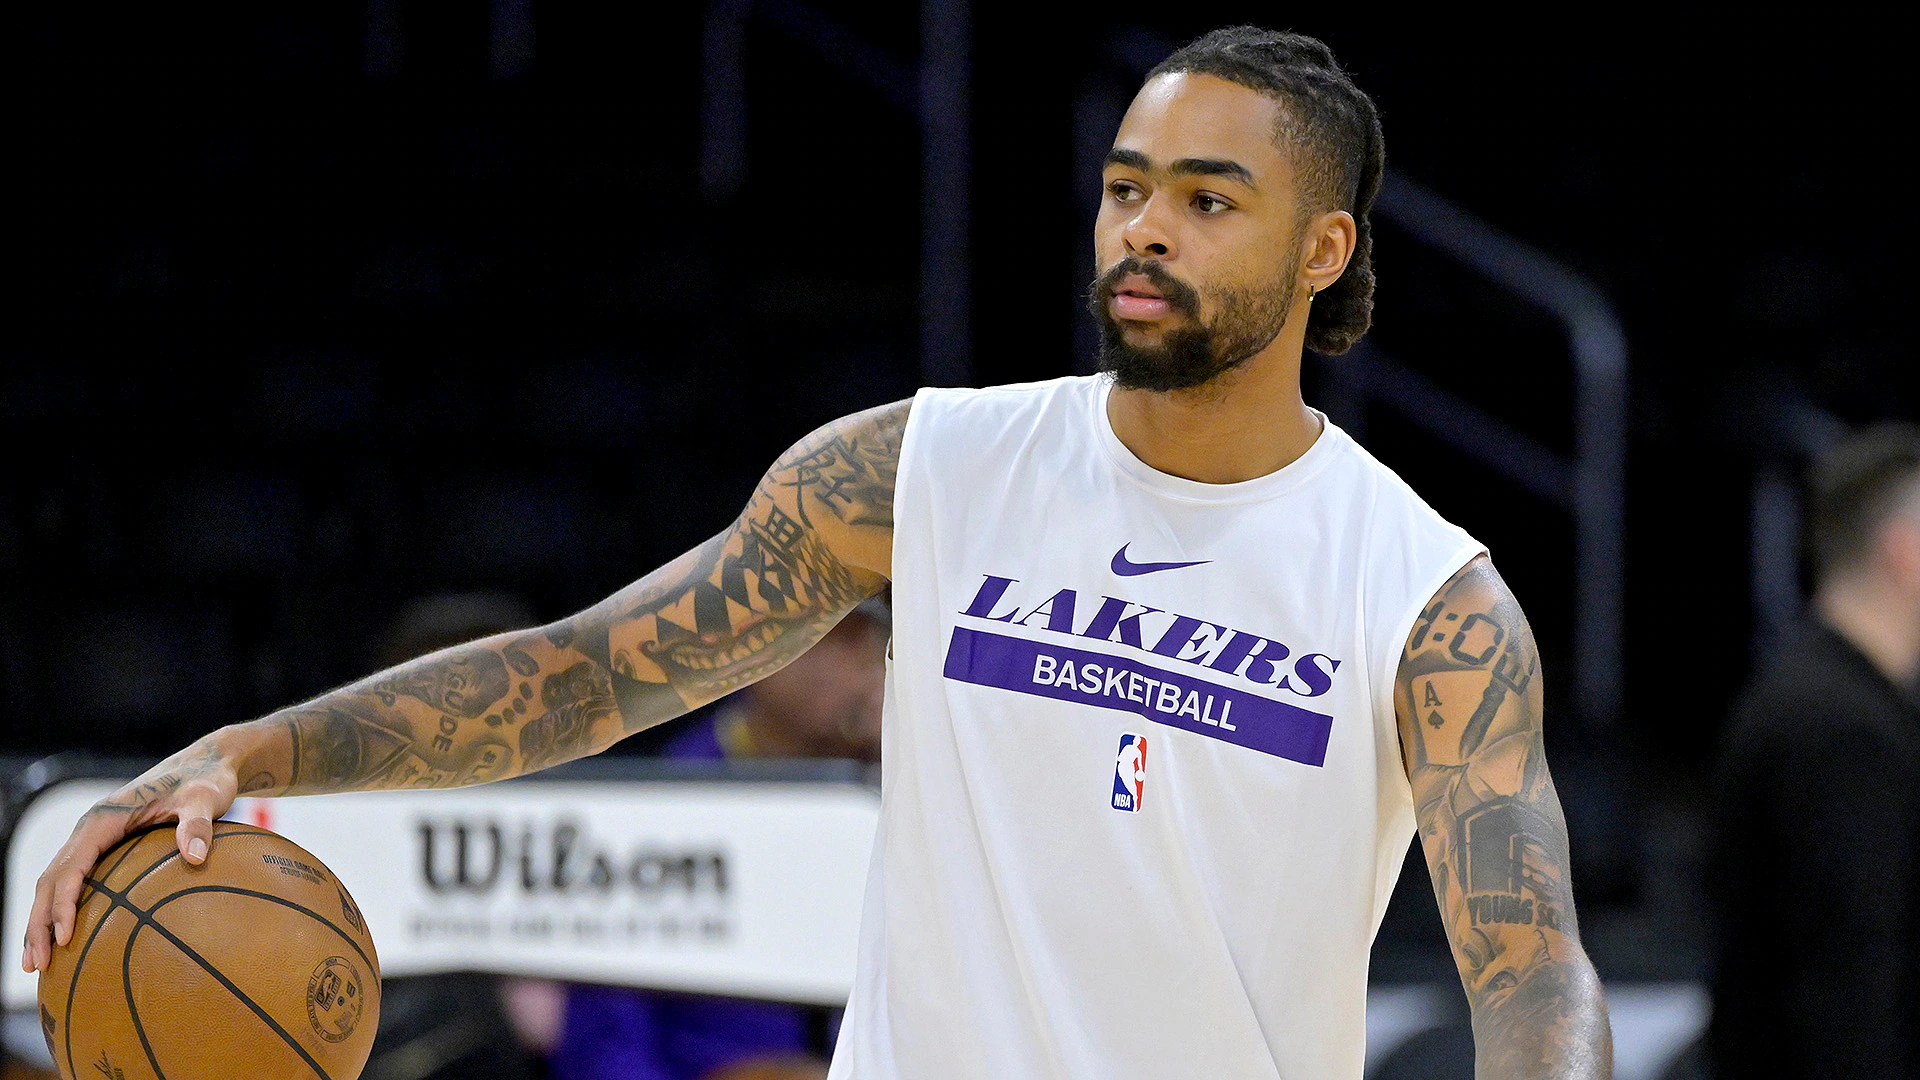 Chicago Bulls to Trade D'Angelo Russell from the Los Angeles Lakers in a High-stakes Trade Proposal